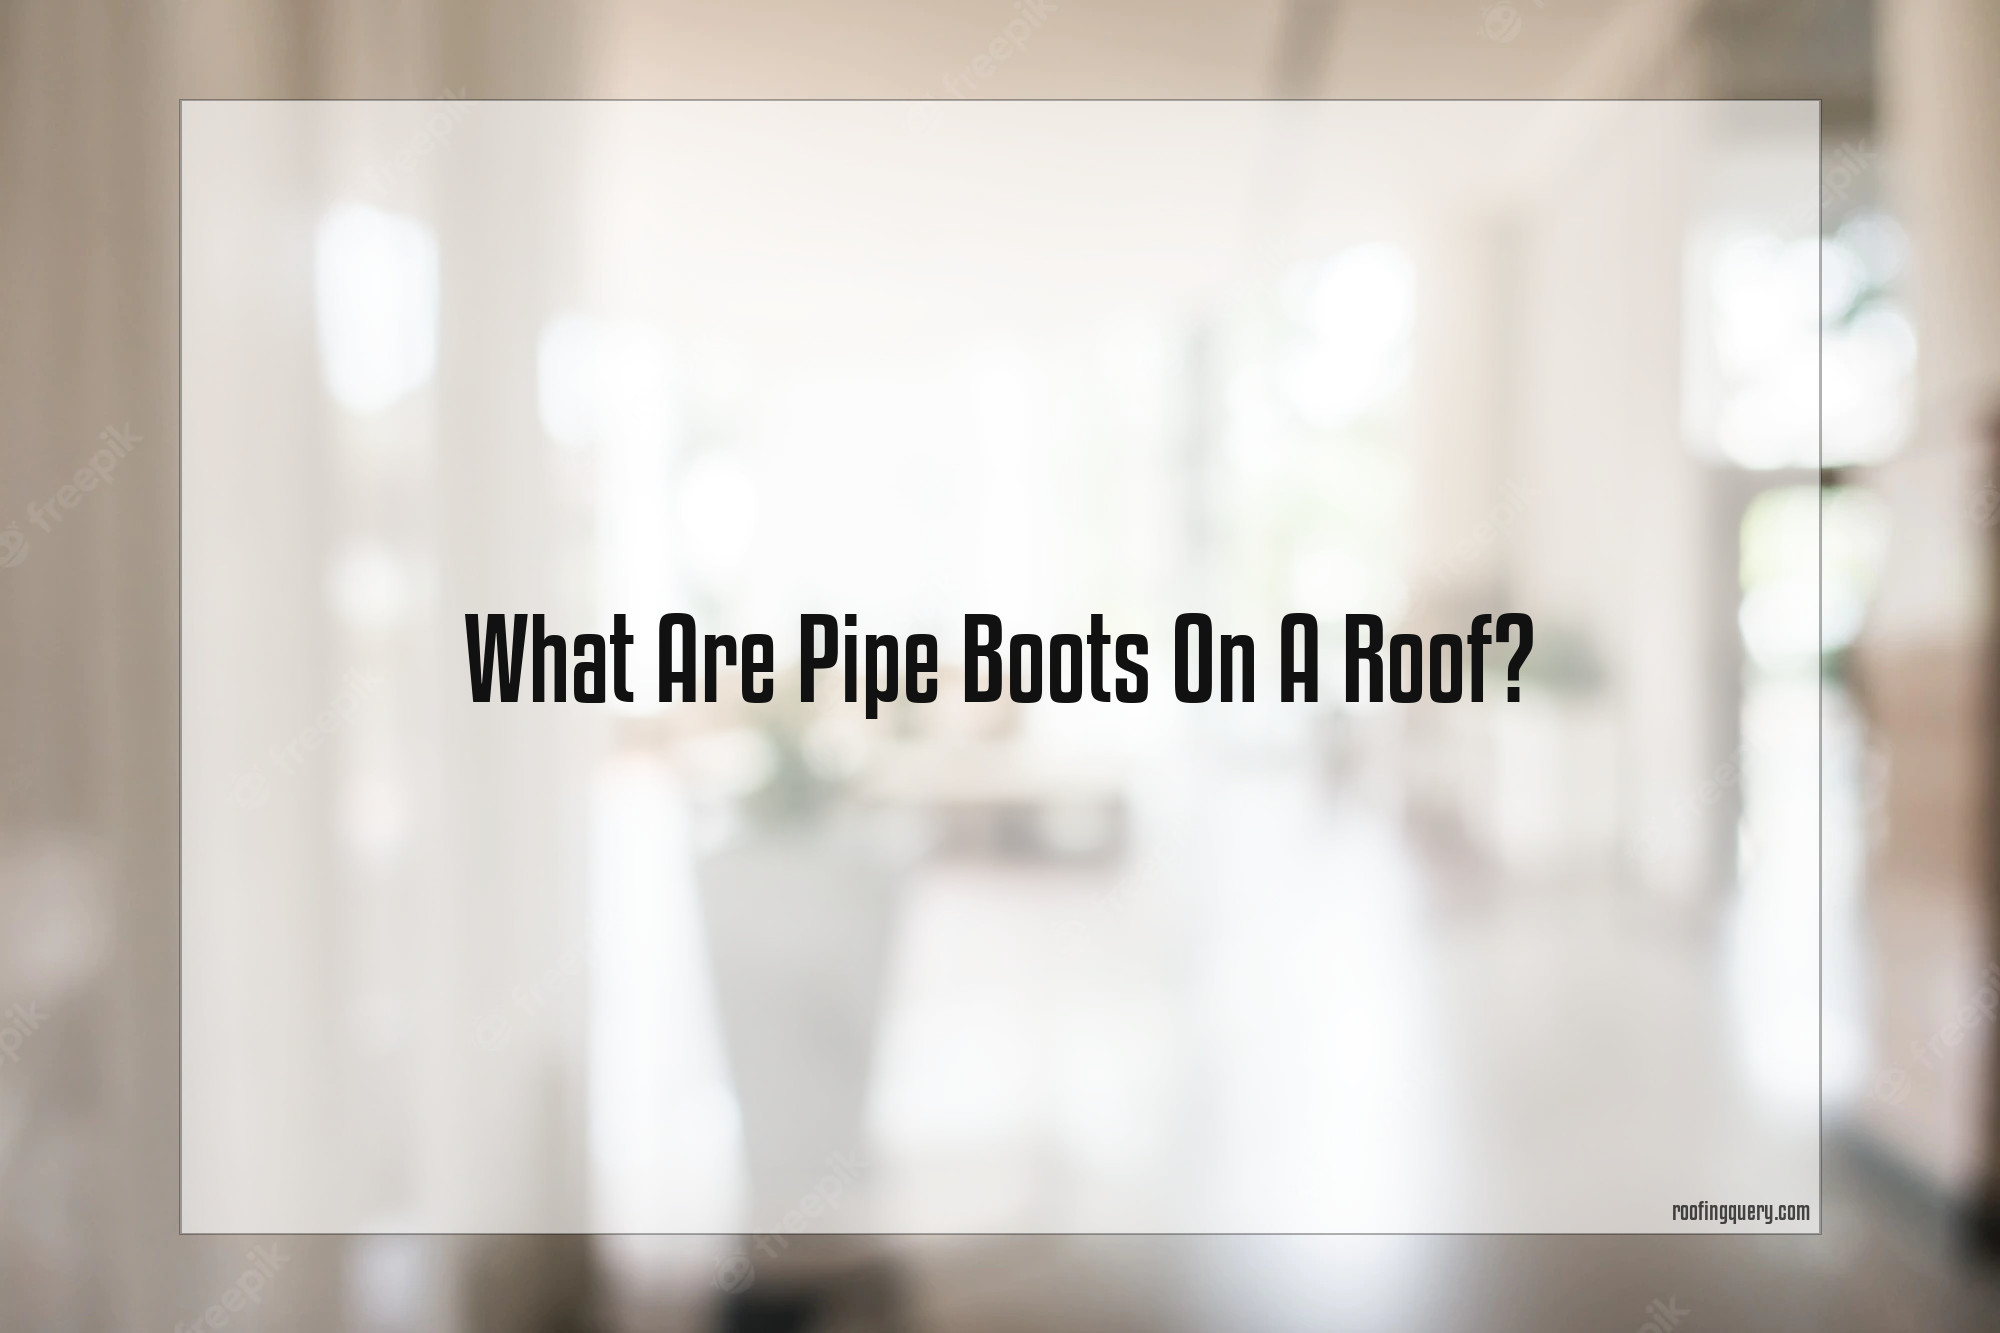 What Are Pipe Boots On A Roof